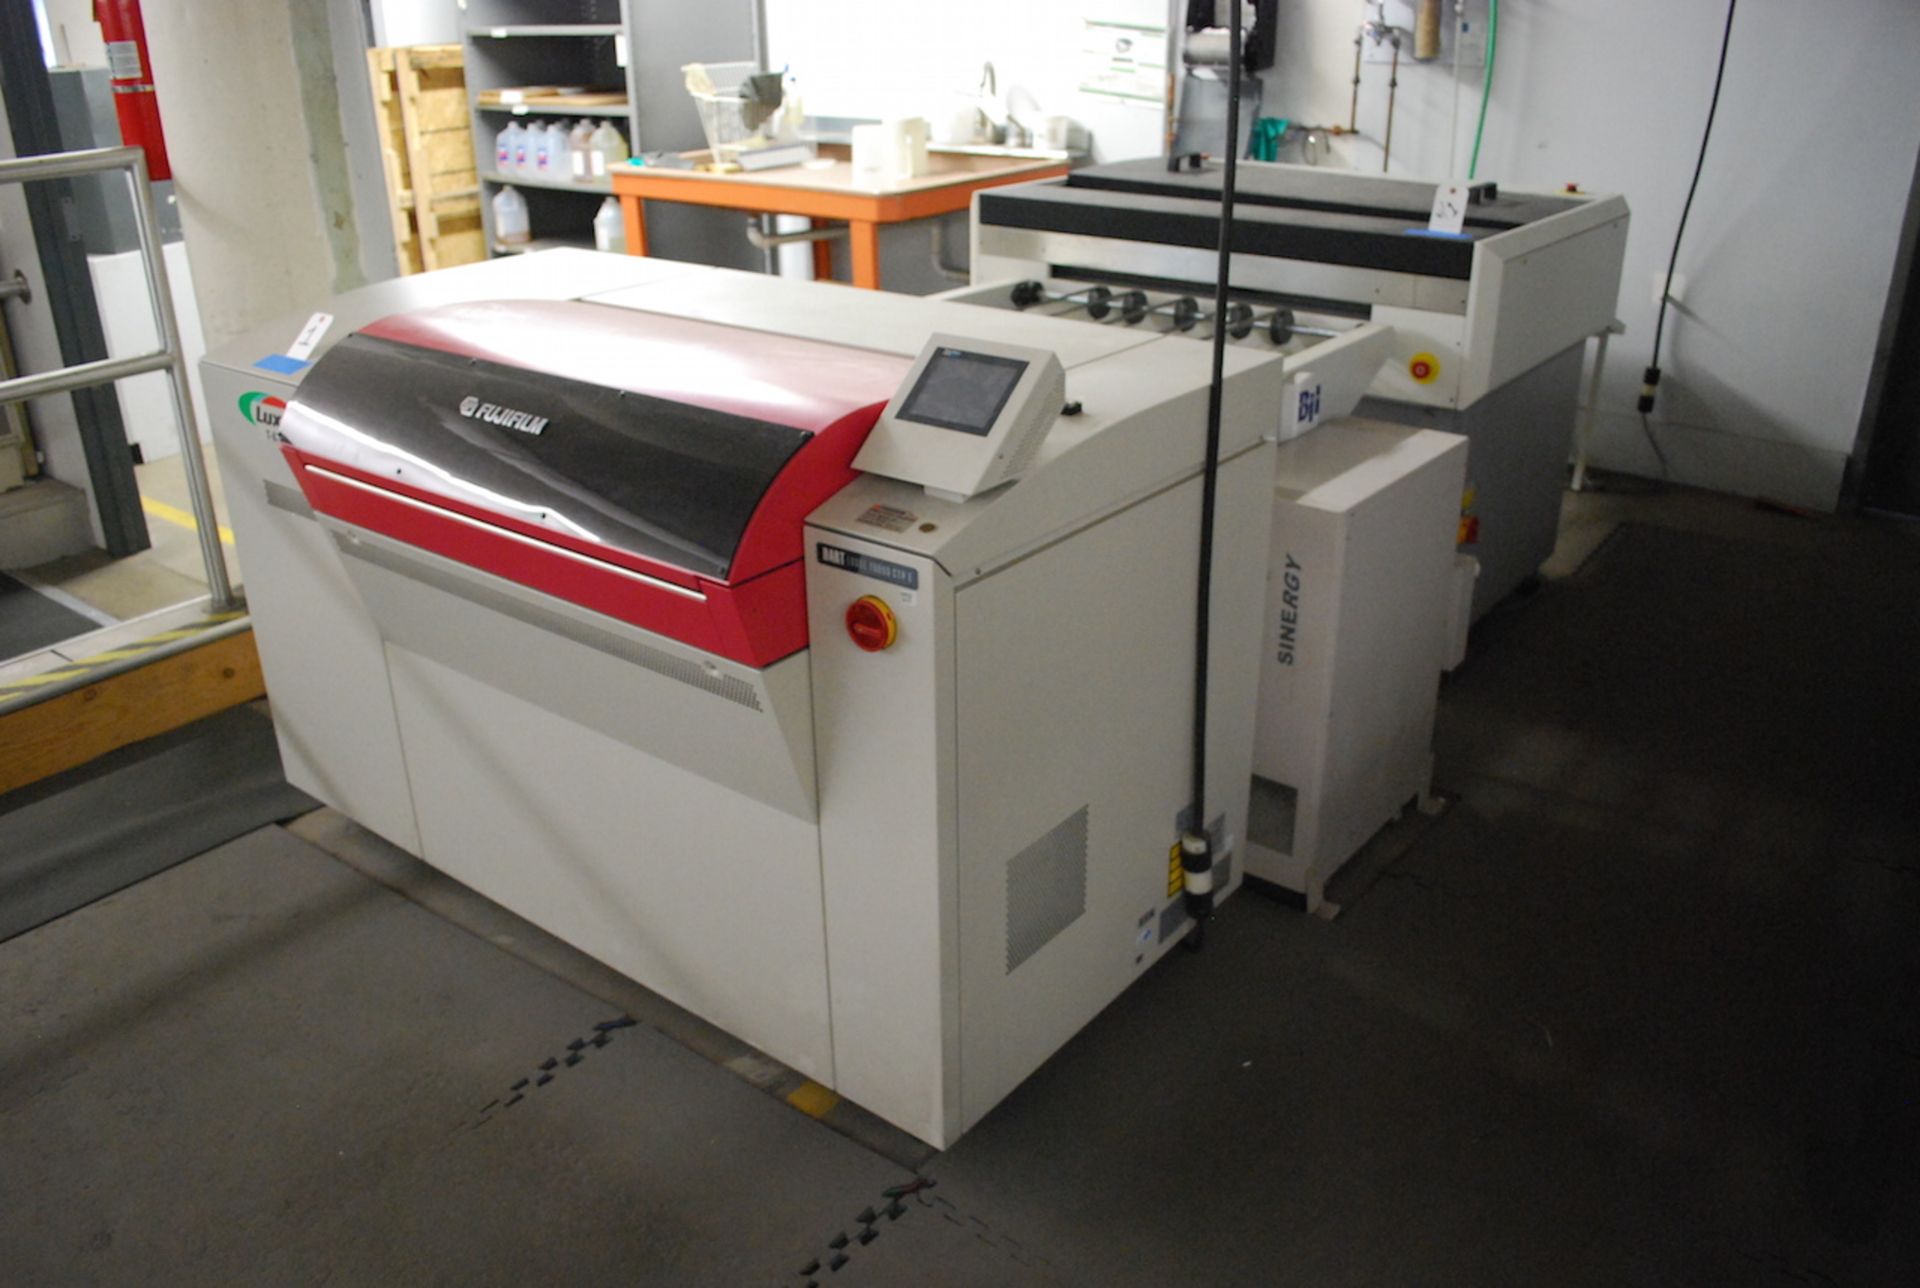 FUJI MODEL PT-R4100 DART LUXEL T-6000 CTP E THERMO PLATE RECORDER: S/N 595 (2004), Installed